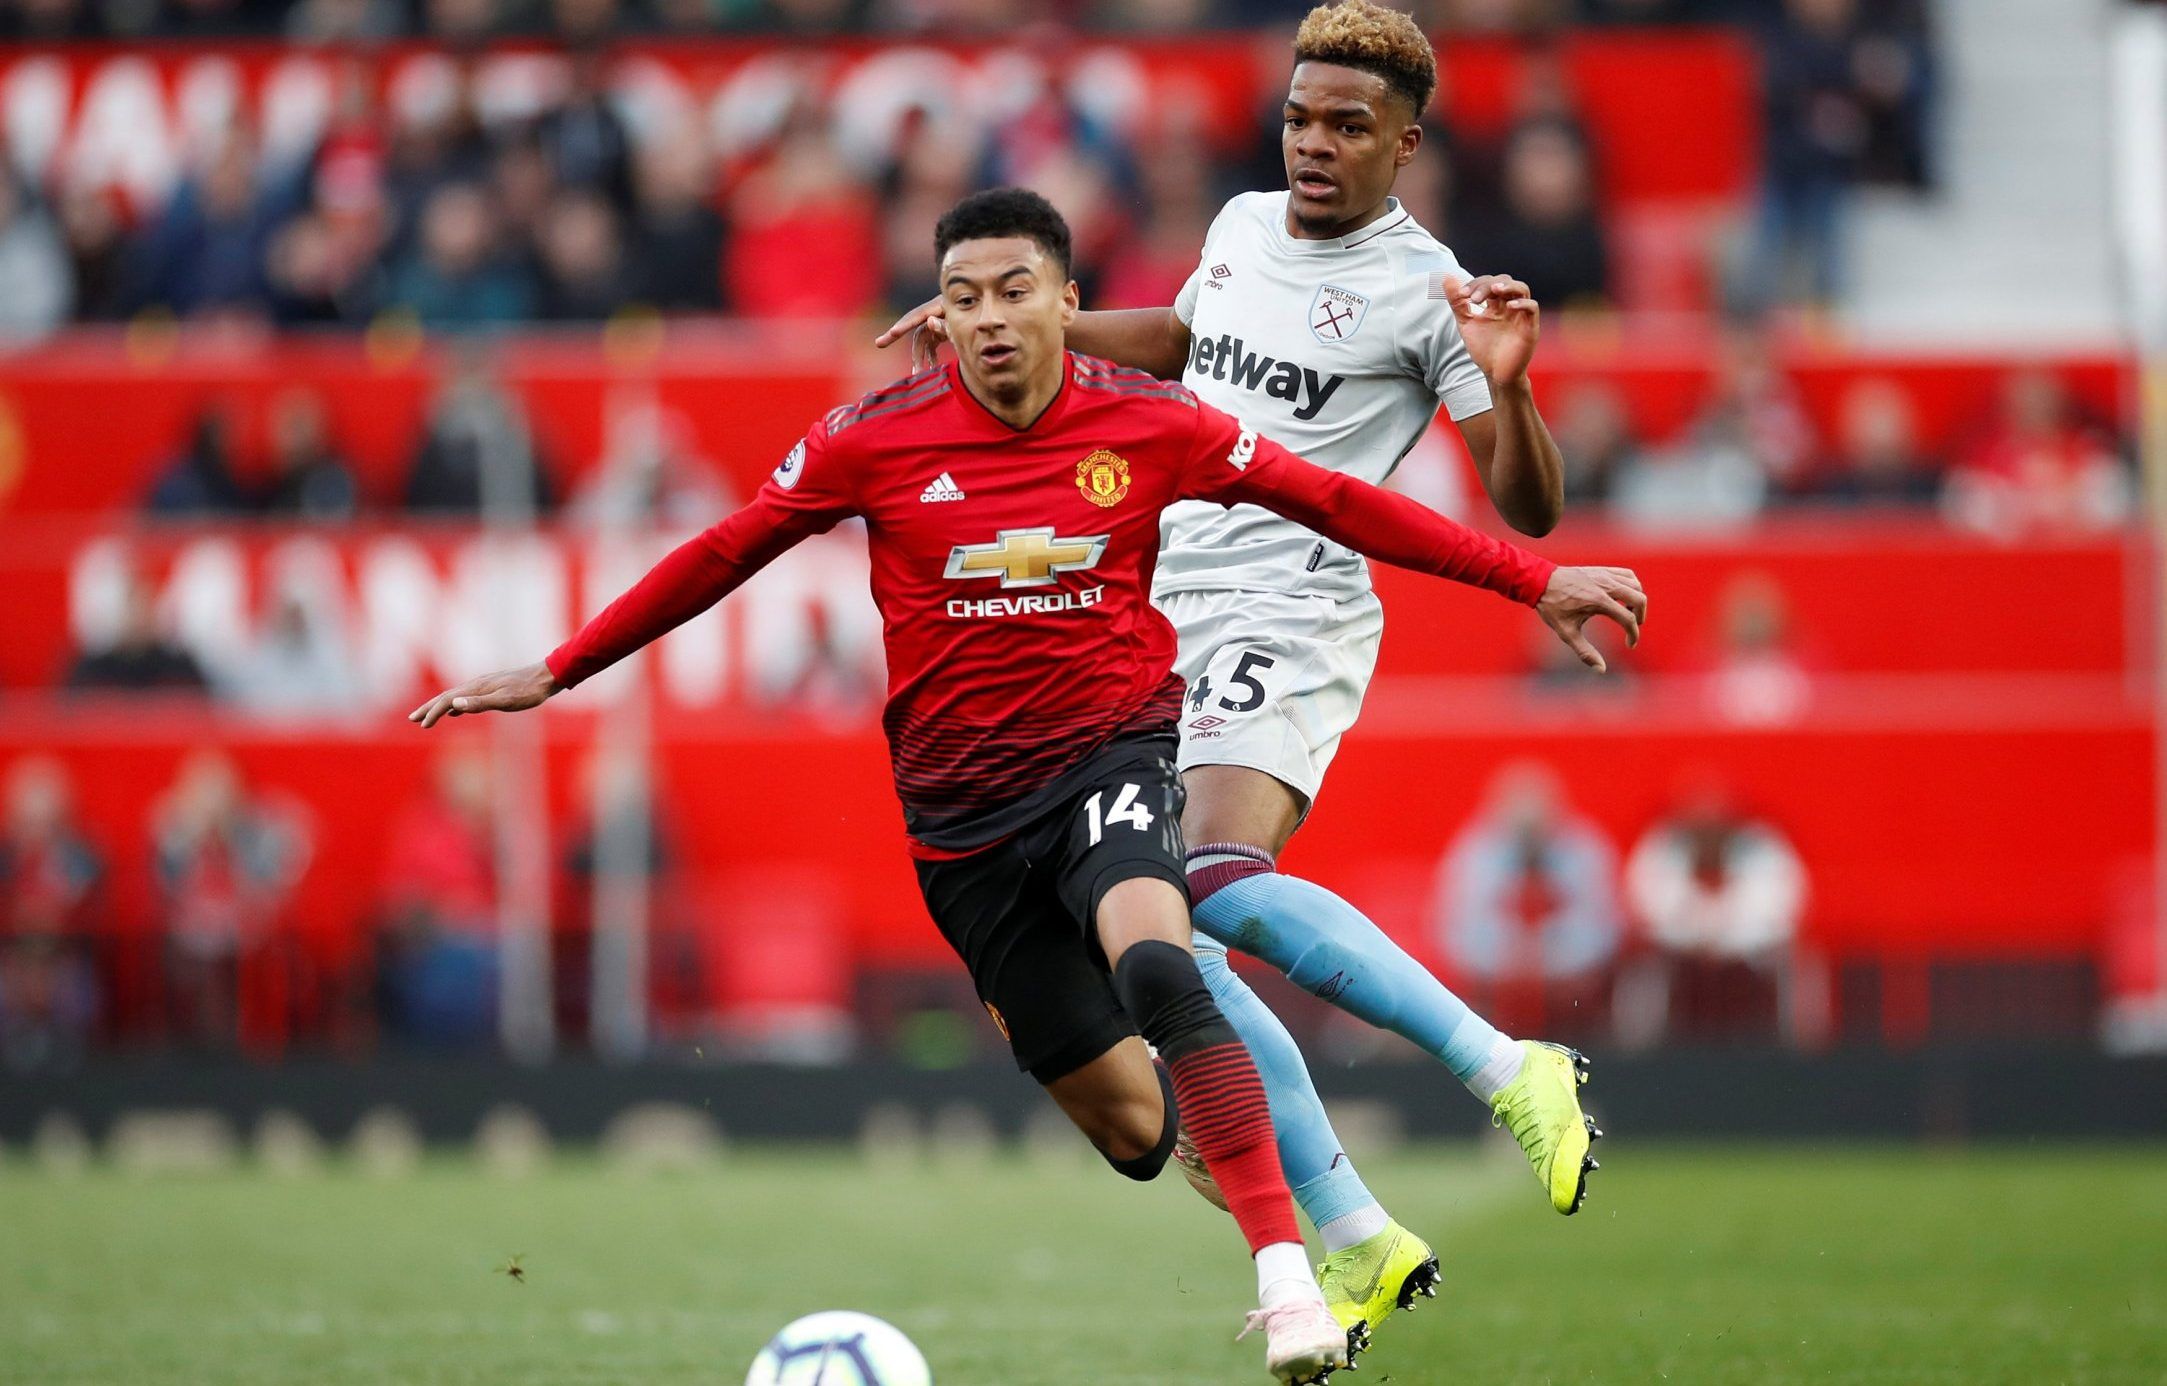 Manchester-United-star-Jesse-Lingard-in-action-with-West-Hams-Grady-Diangana